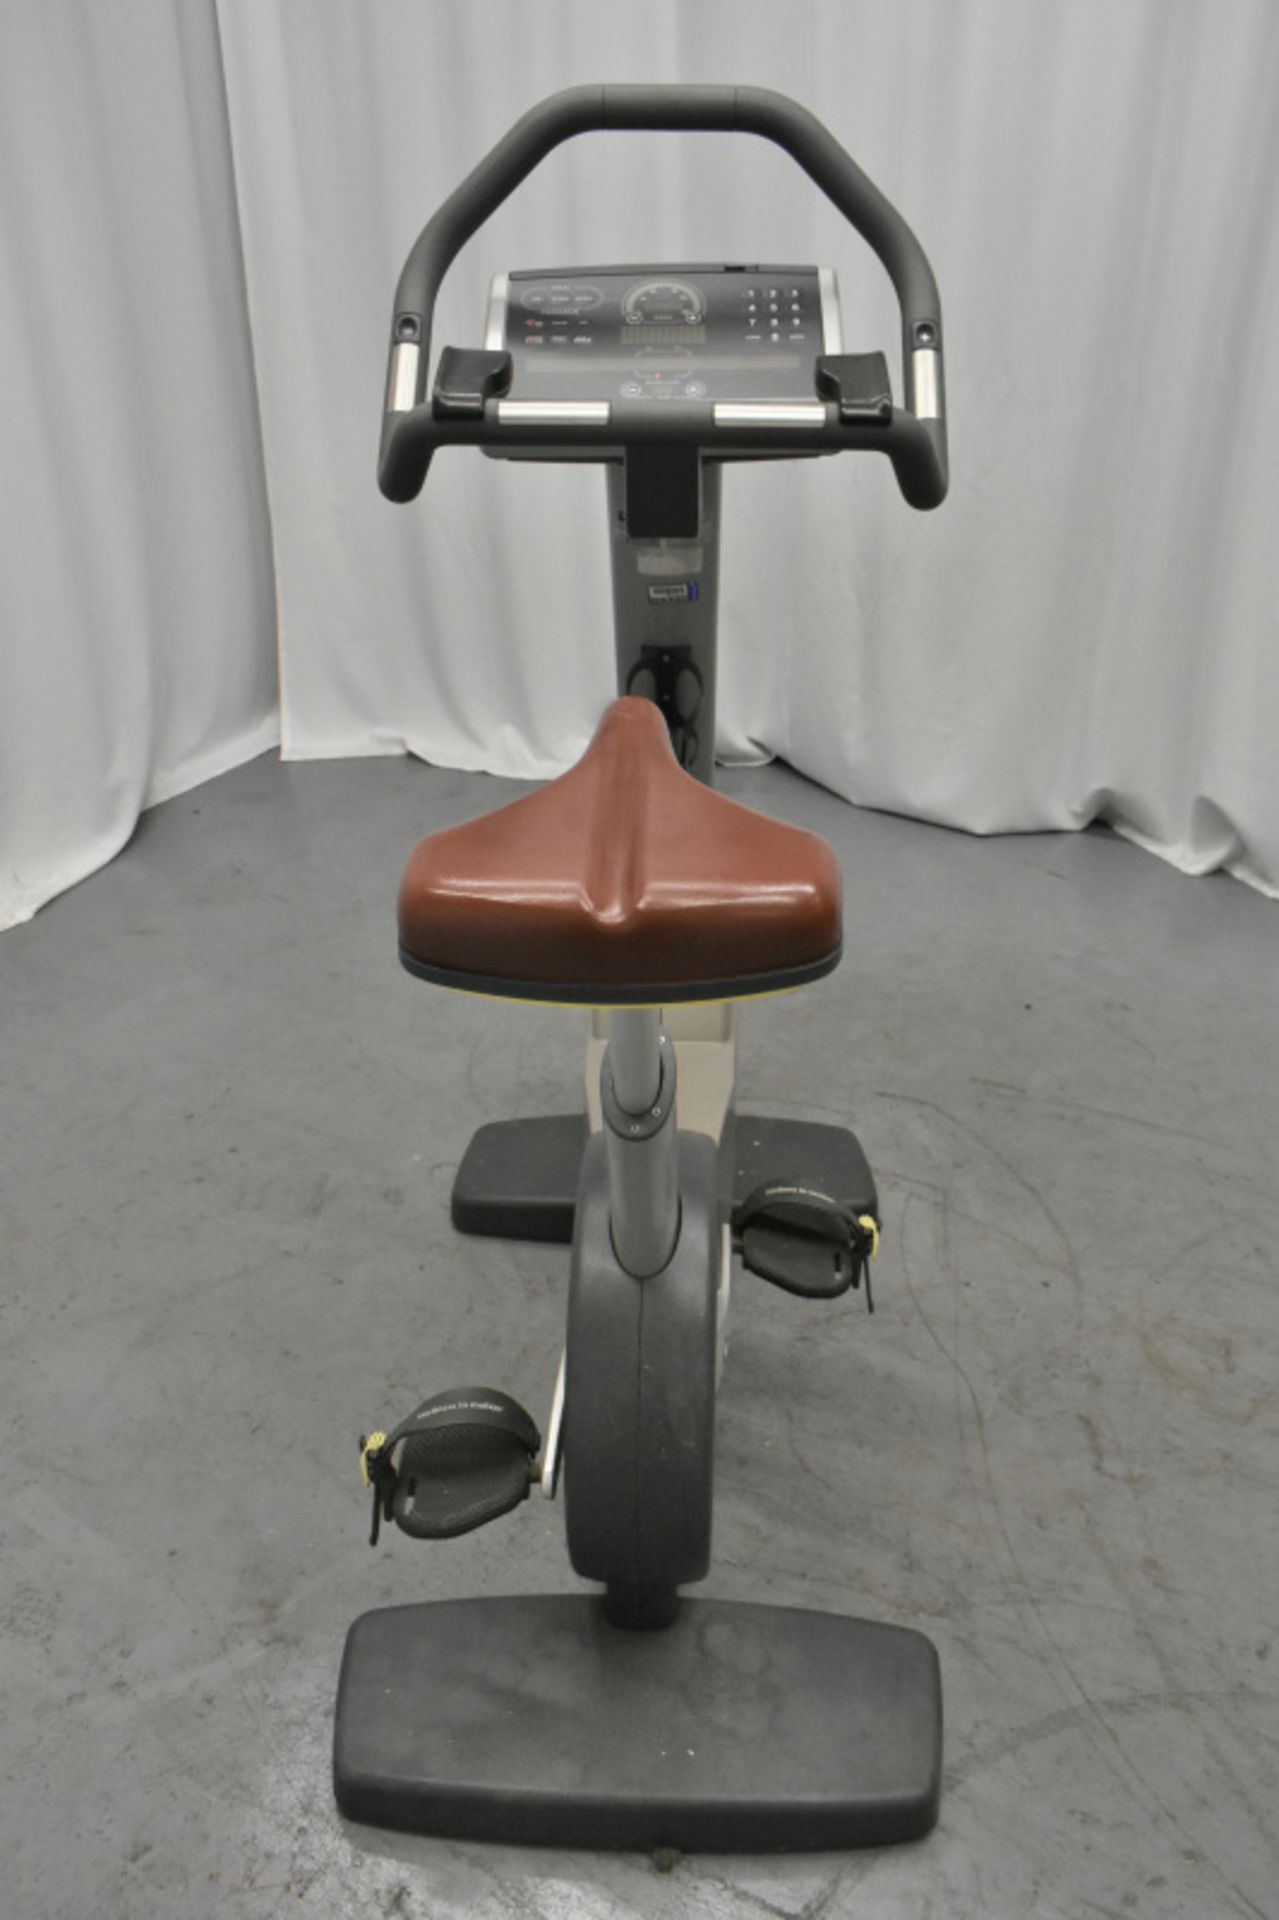 Technogym Exercise Bike - Please check pictures for overall condition - Image 6 of 12